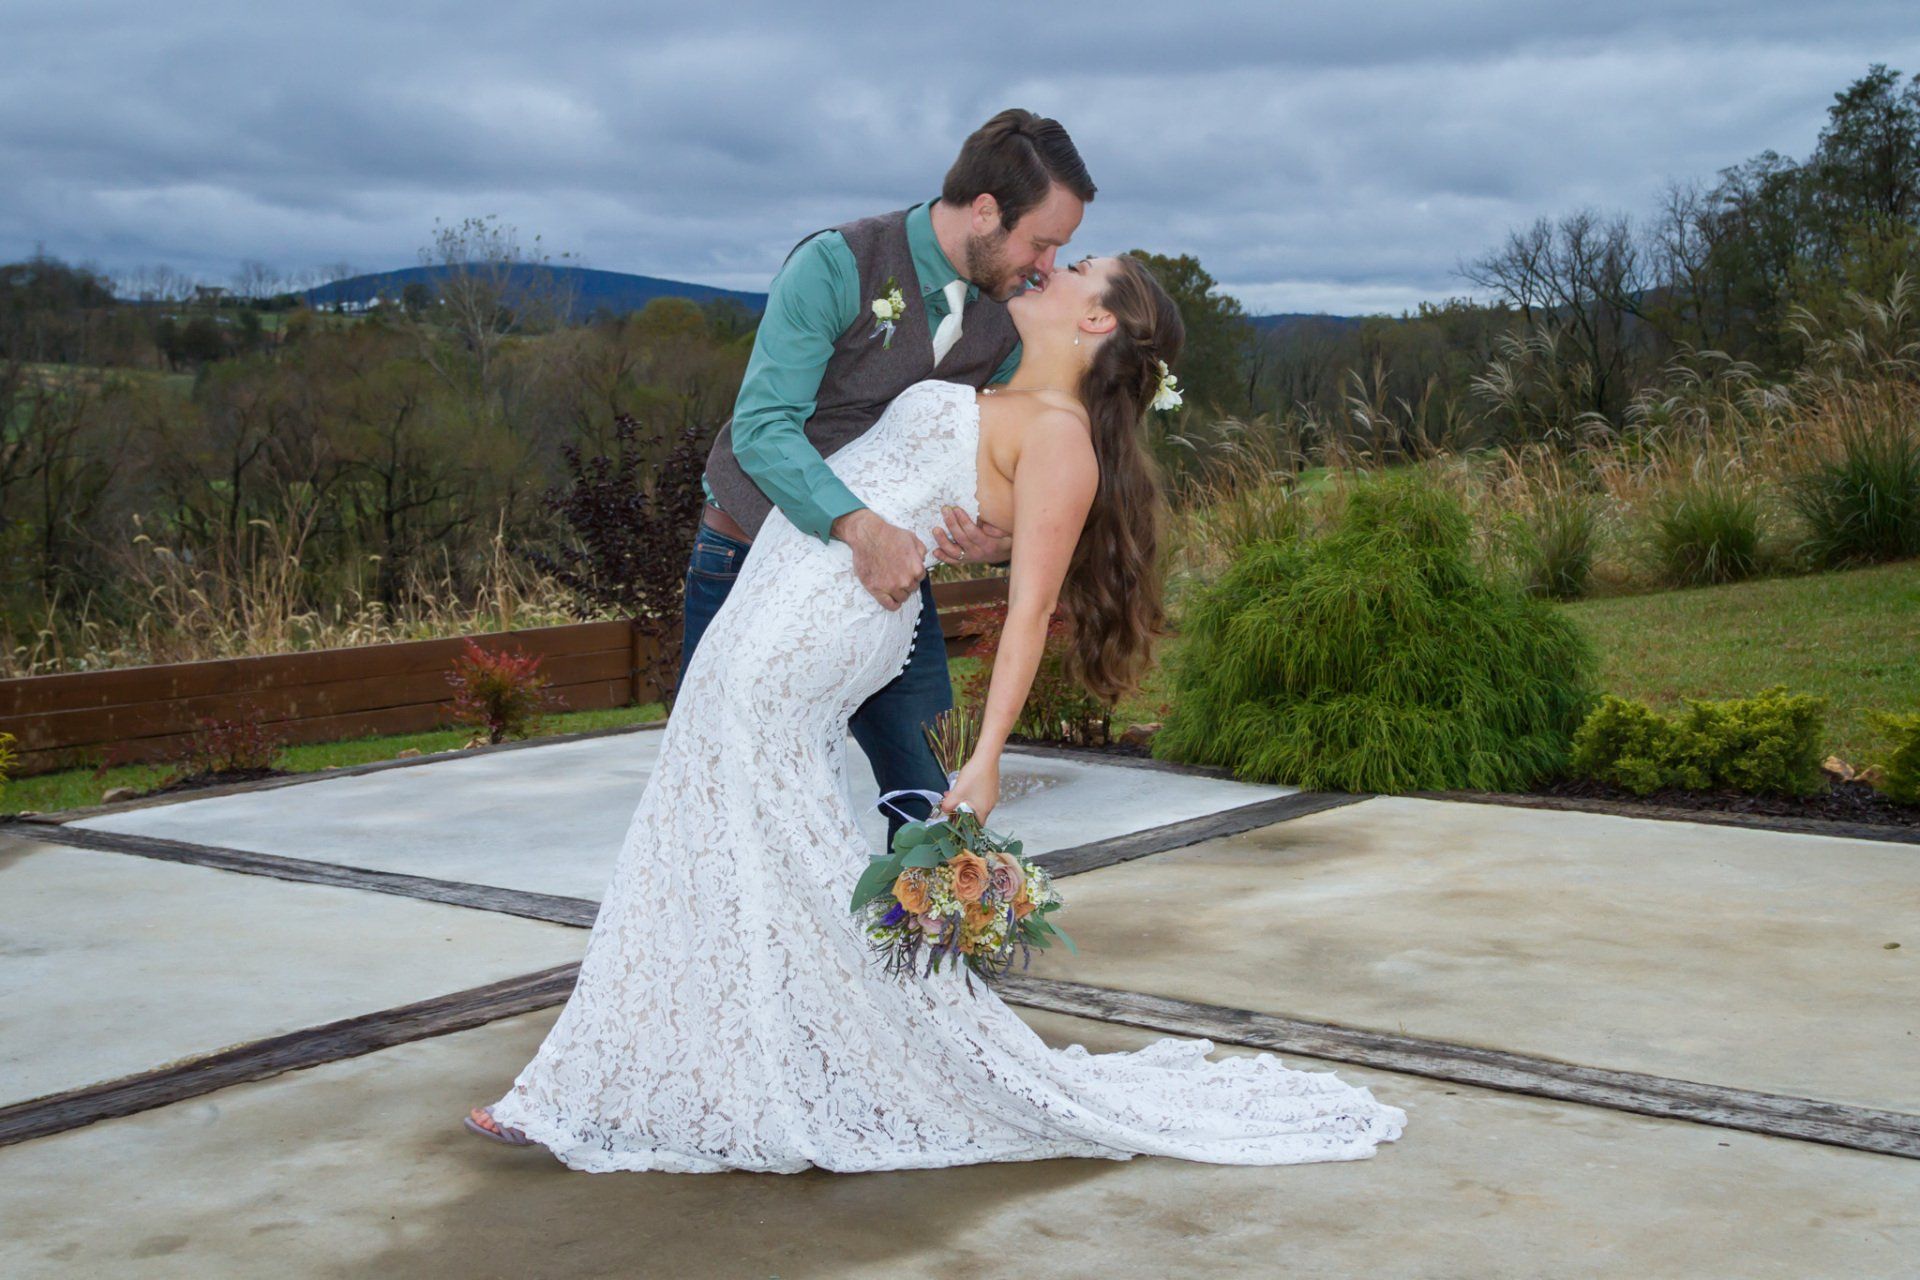 A bride and groom embracing and dipping and kissing at an outdoor venue